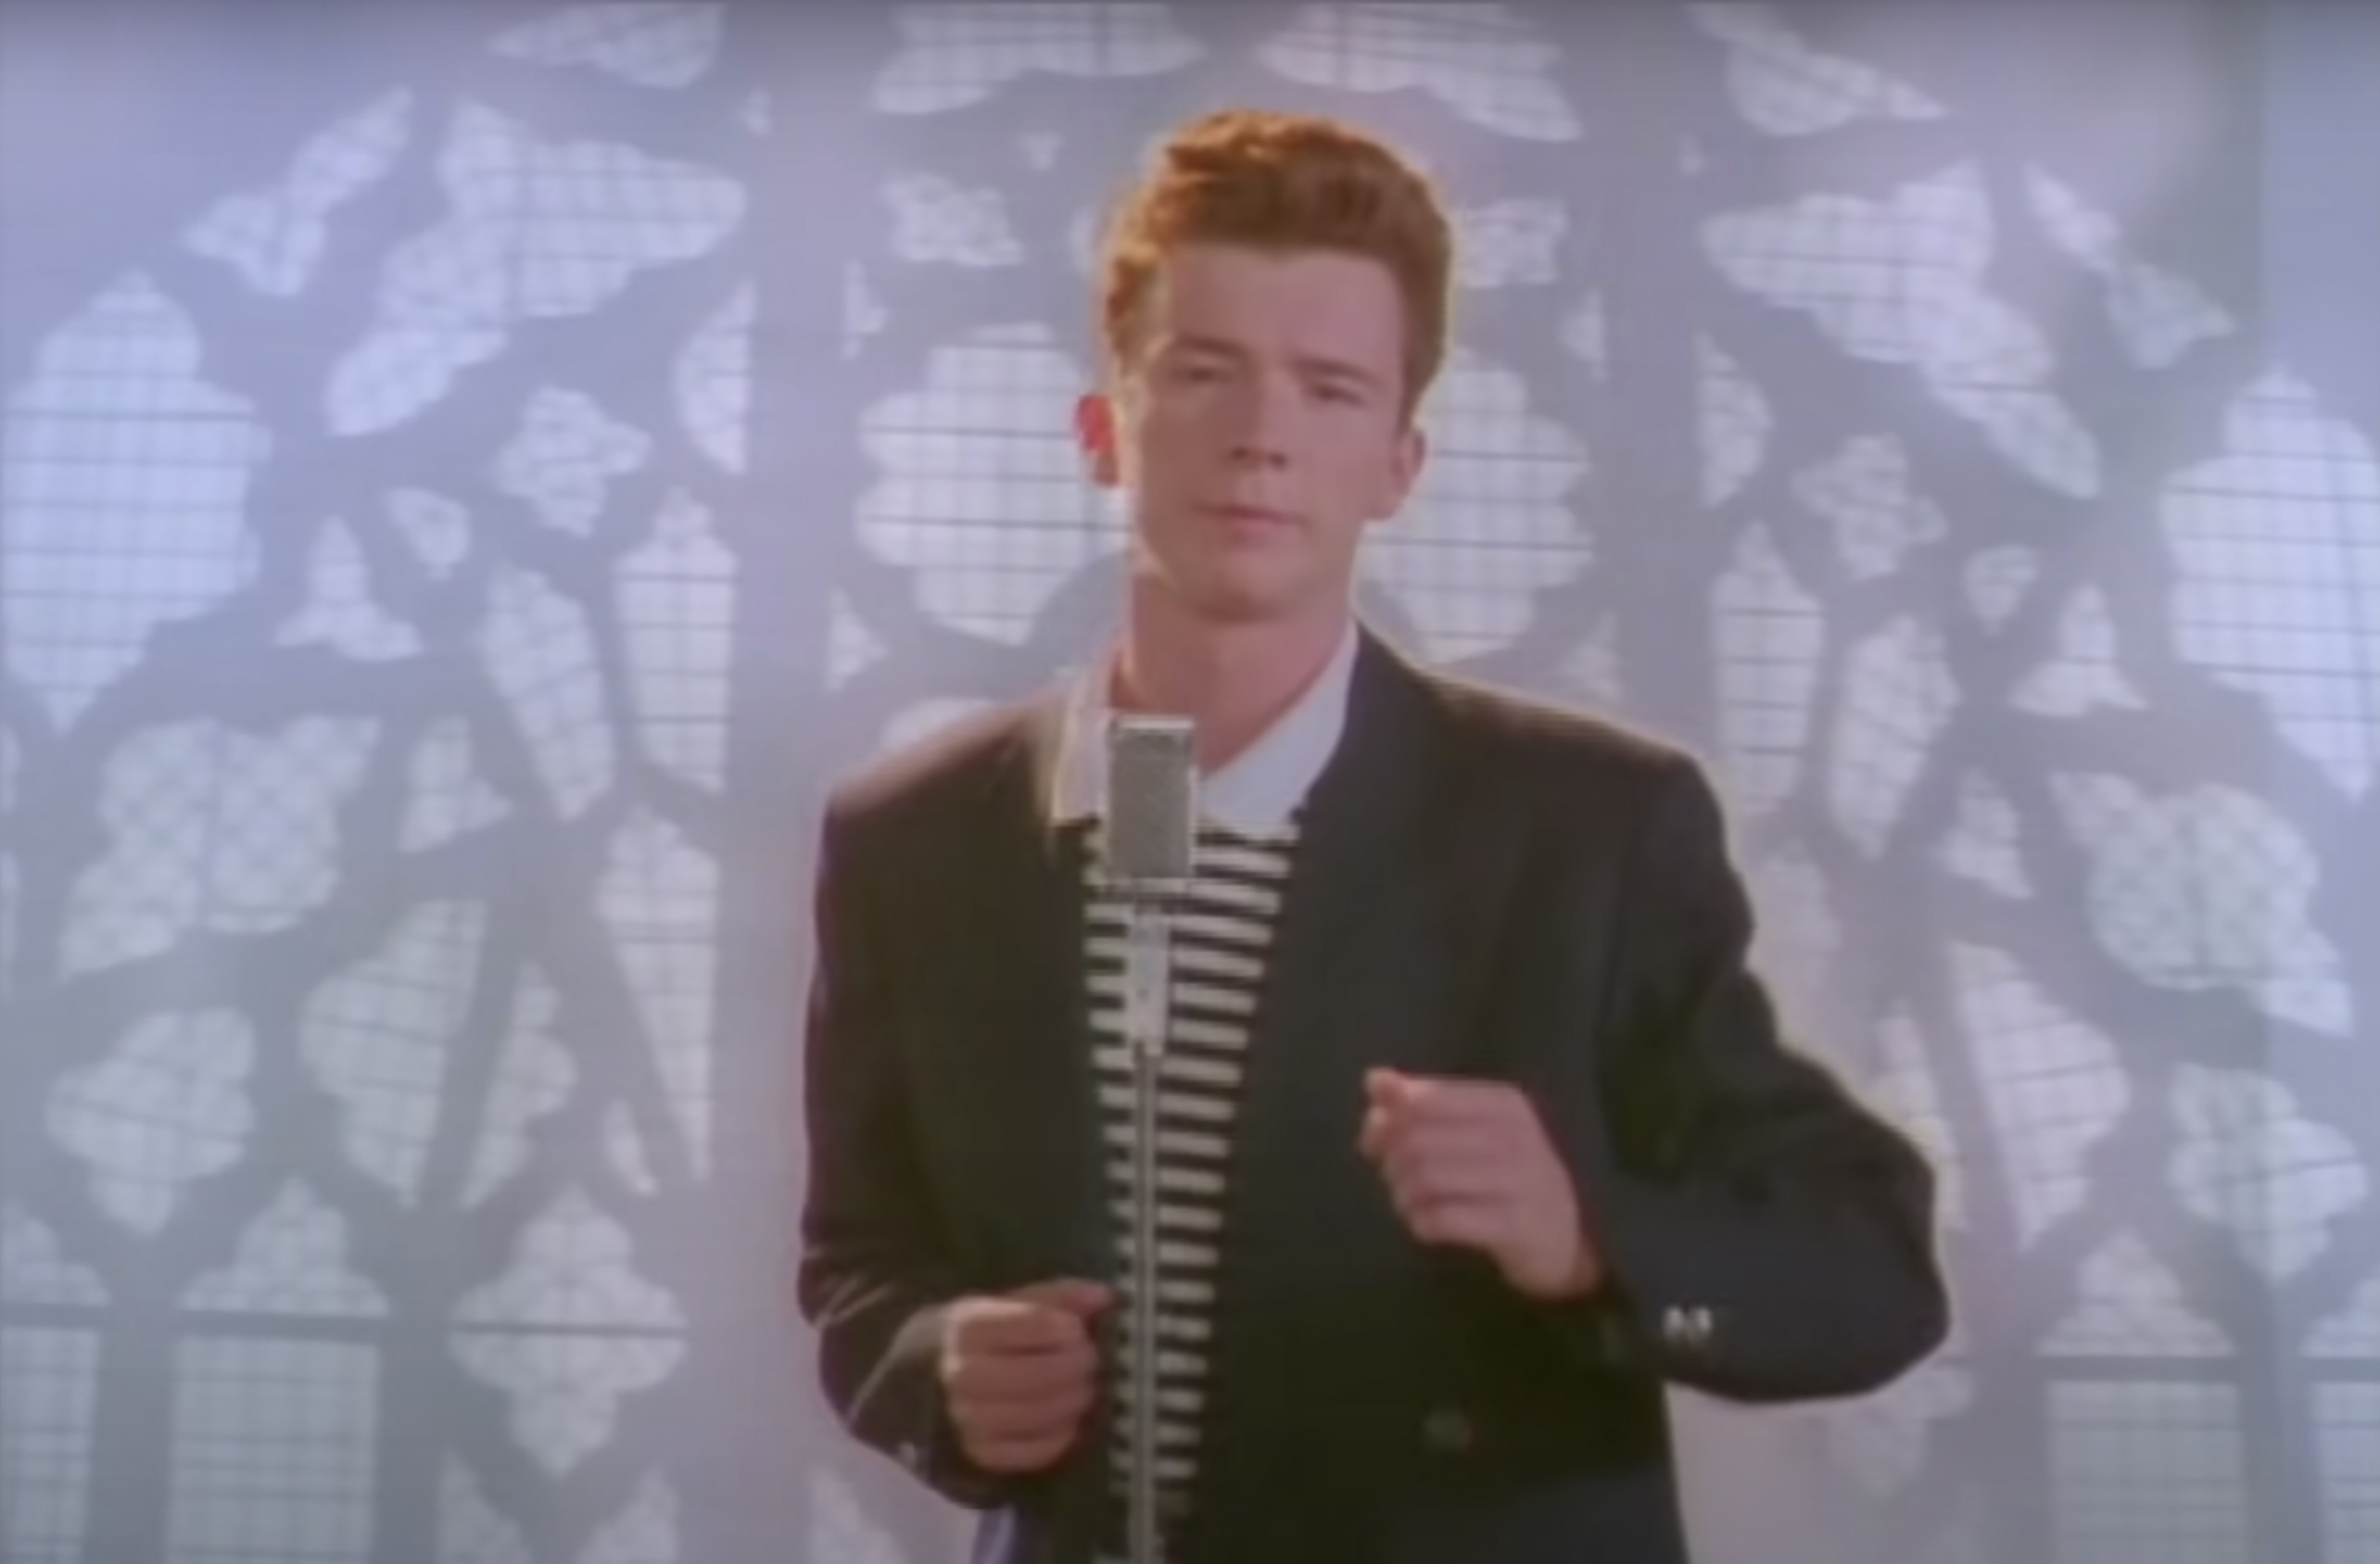 Rick Astley Sues Rapper Yung Gravy Over Soundalike Song